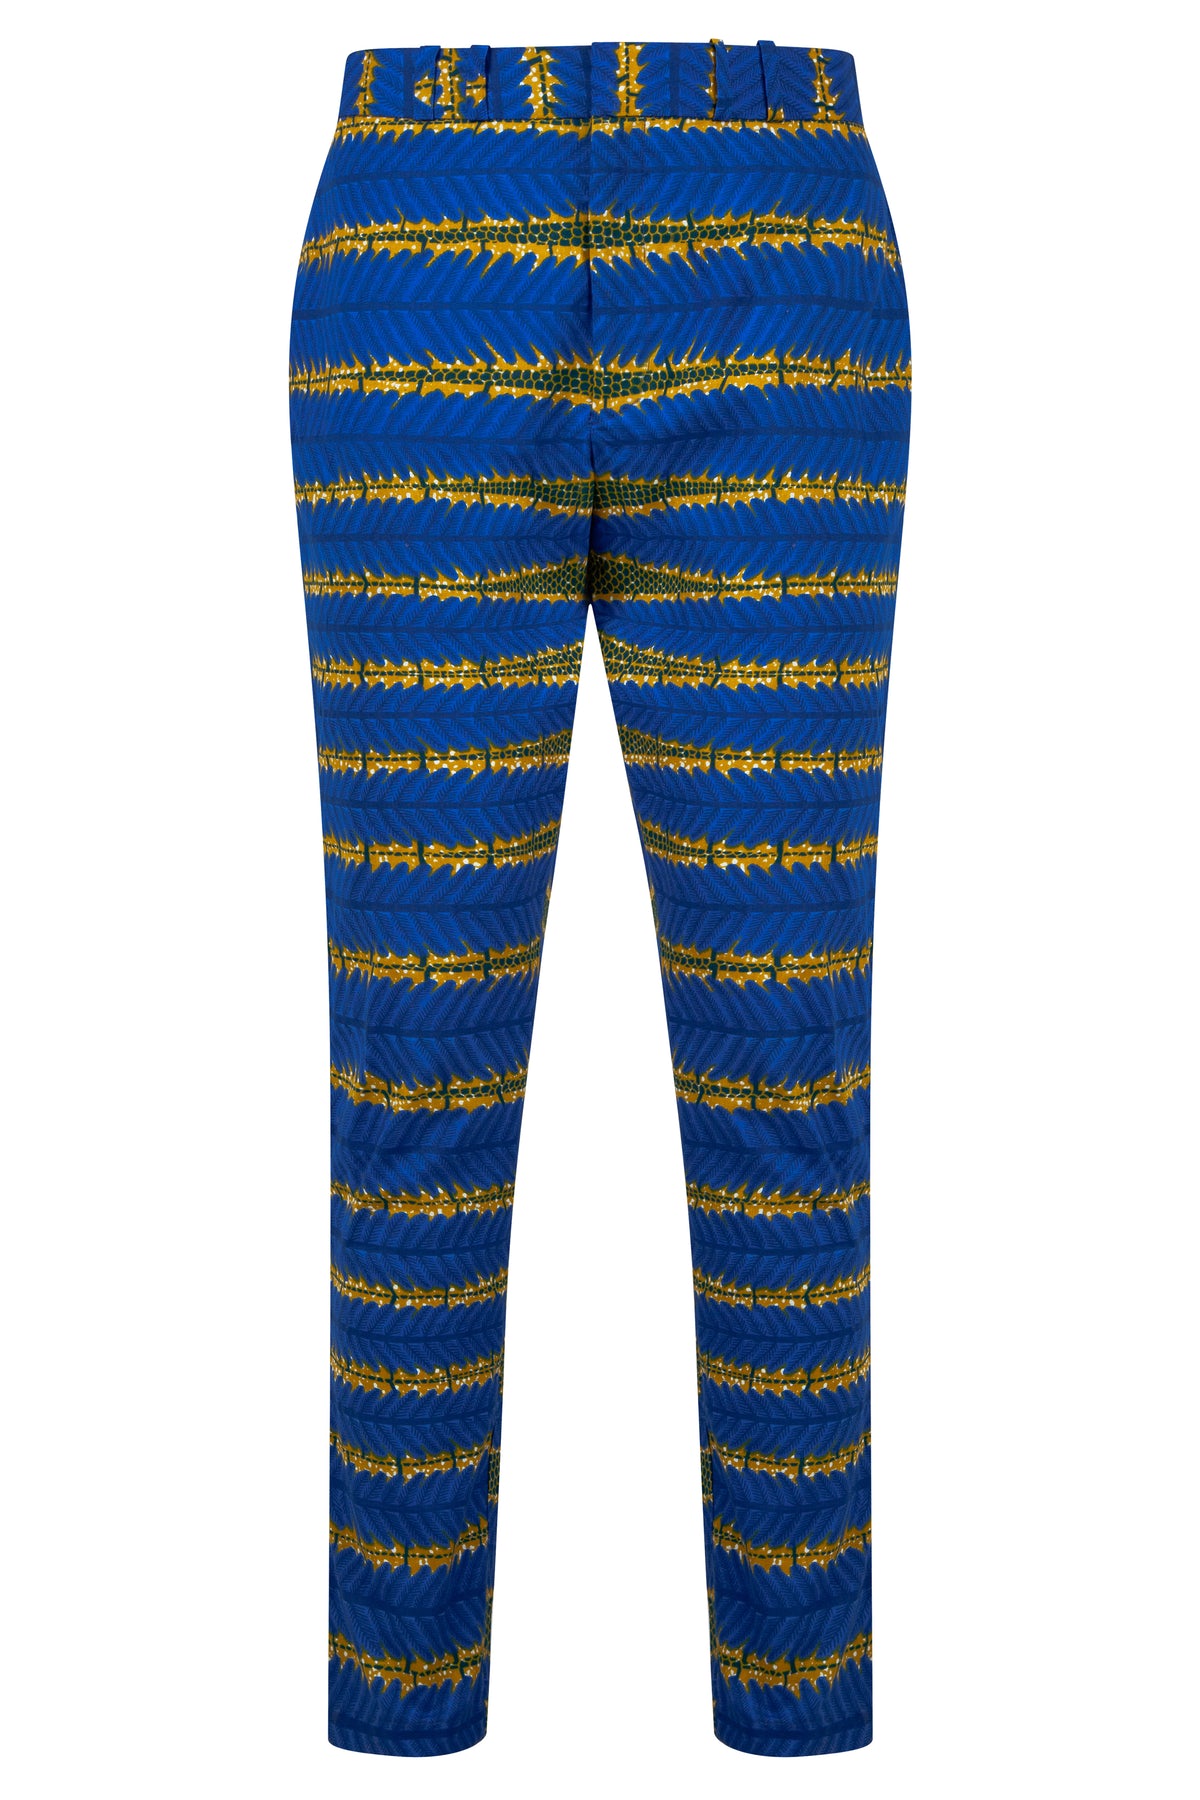 Osei Men's African print fitted trousers-Spider Web - OHEMA OHENE AFRICAN INSPIRED FASHION